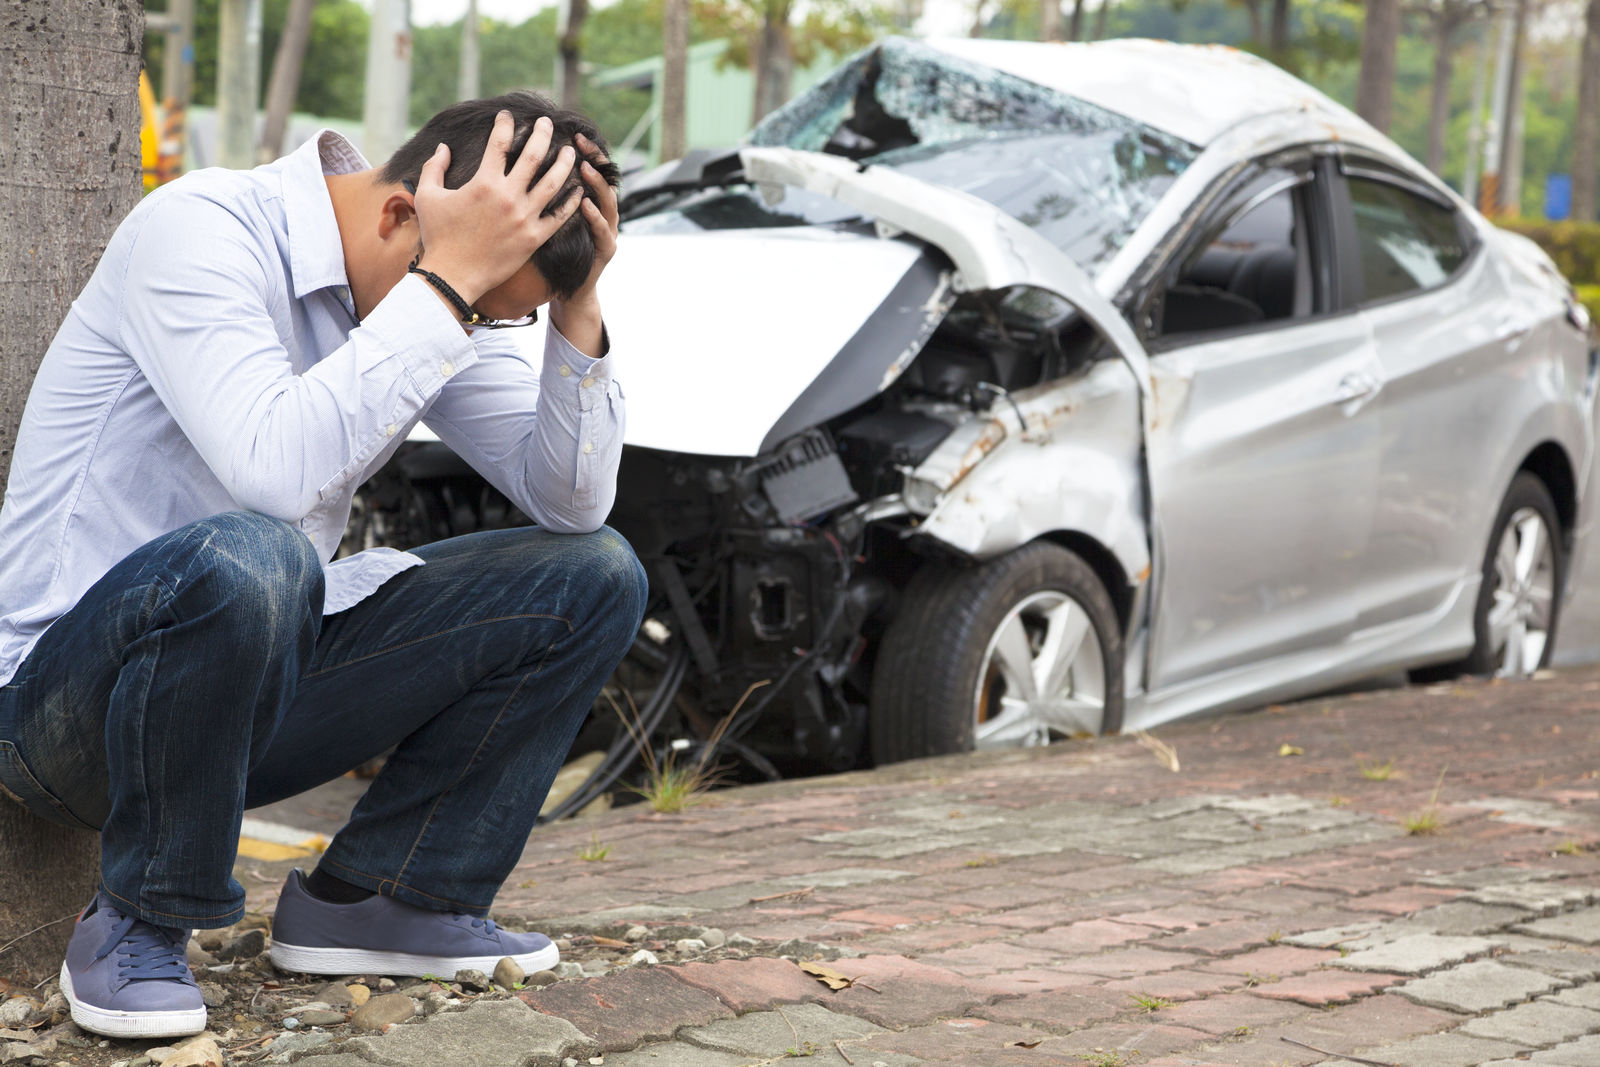 If my car is totaled, what will insurance pay?